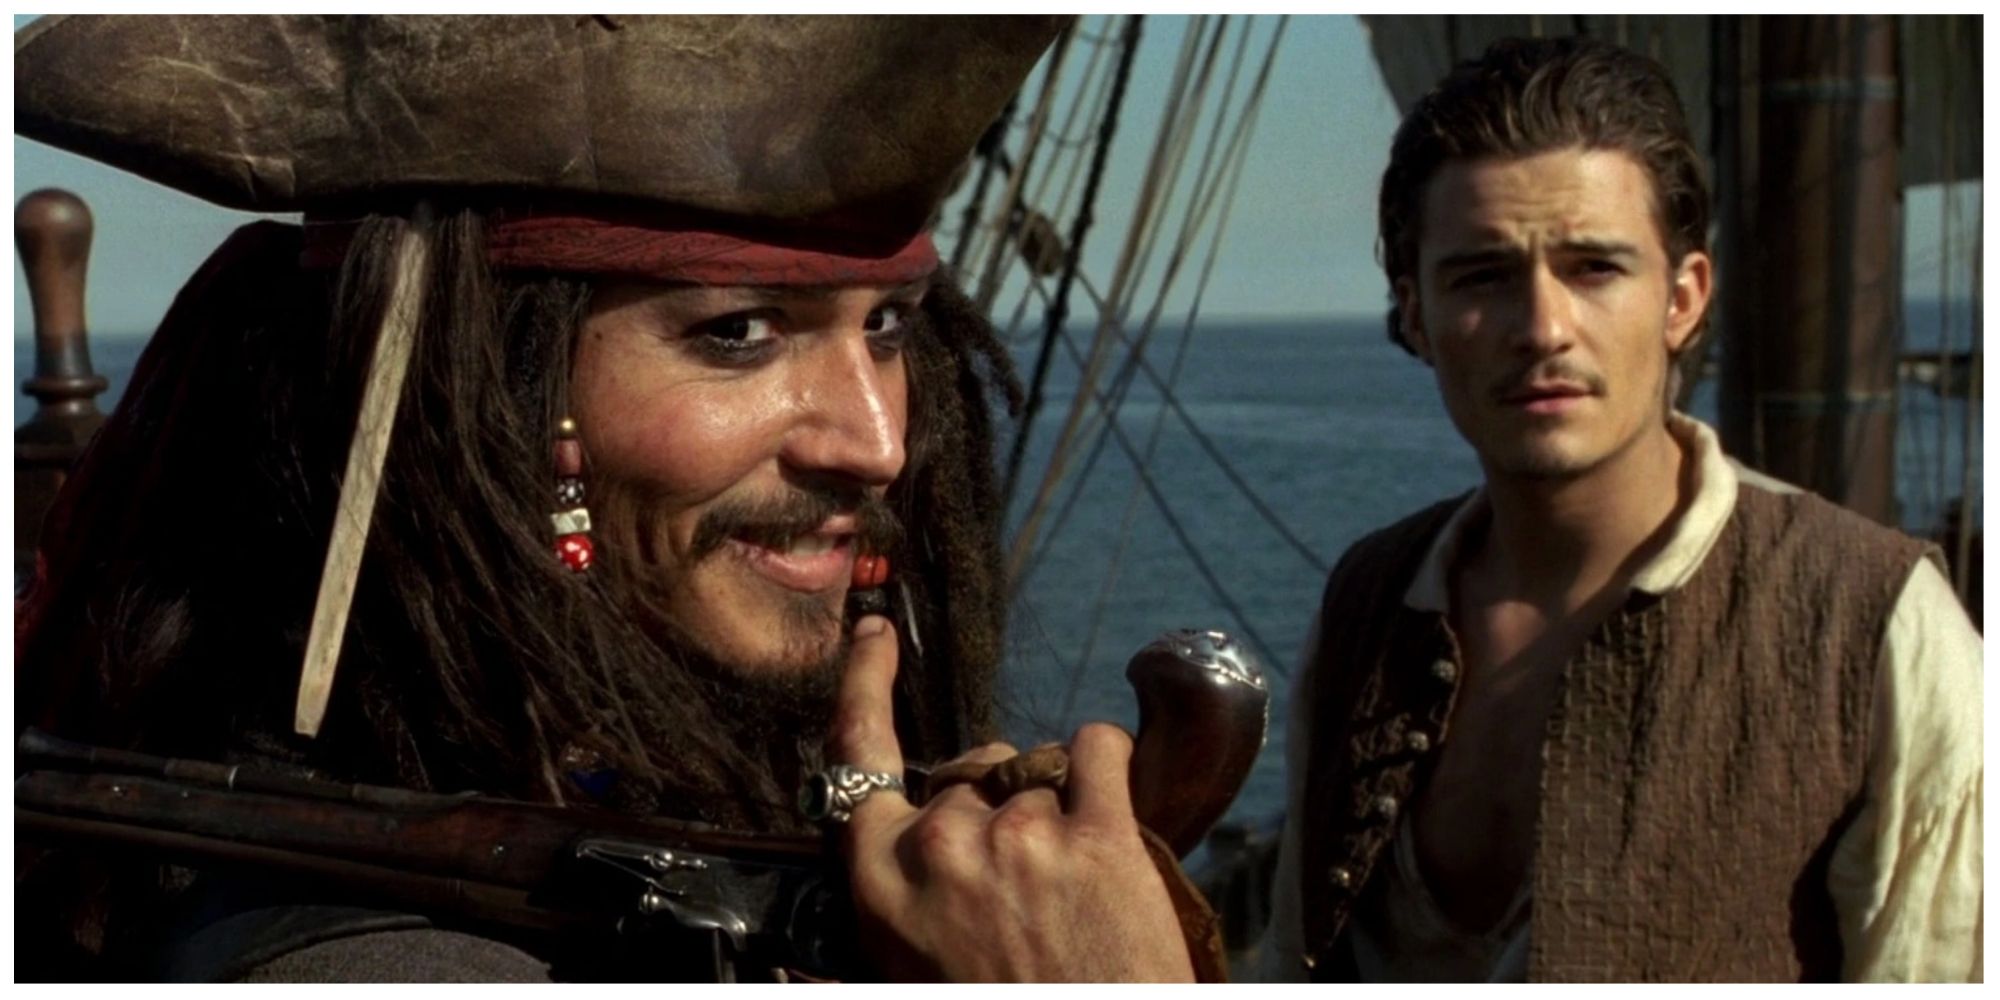 Johnny Depp as Jack Sparrow and Orlando Bloom as Will Turner in Pirates of the Carribean: Curse of the black pearl